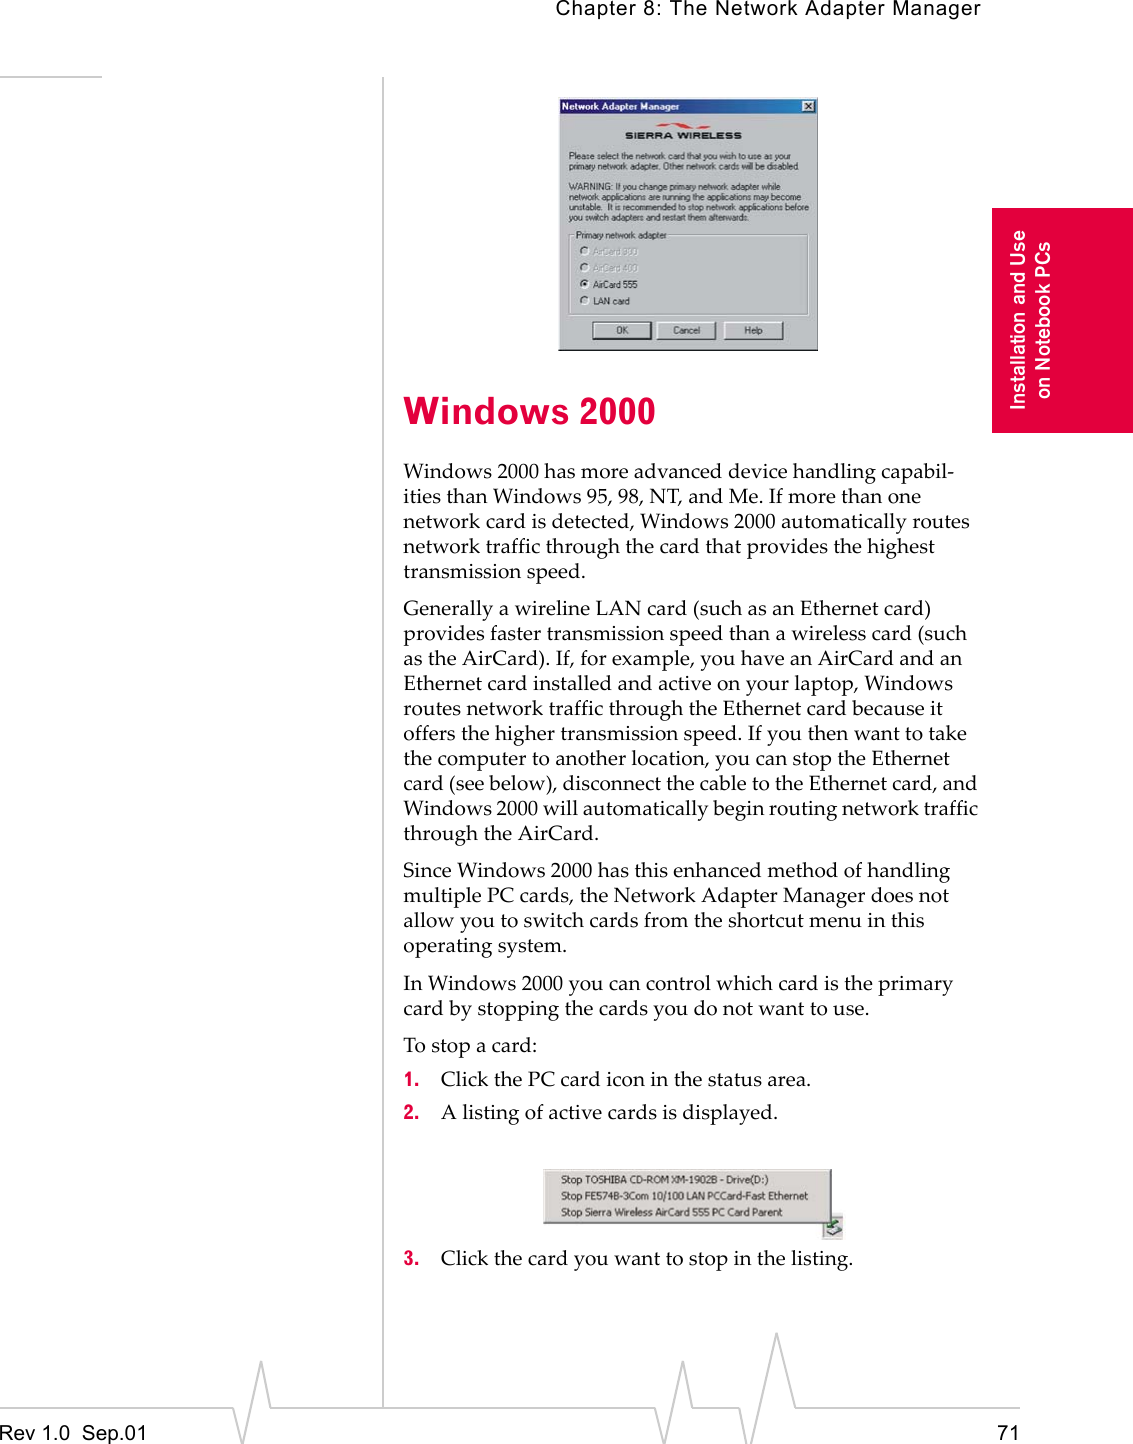 Chapter 8: The Network Adapter ManagerRev 1.0  Sep.01 71Installation and Useon Notebook PCsWindows 2000Windows 2000 has more advanced device handling capabil-ities than Windows 95, 98, NT, and Me. If more than one network card is detected, Windows 2000 automatically routes network traffic through the card that provides the highest transmission speed. Generally a wireline LAN card (such as an Ethernet card) provides faster transmission speed than a wireless card (such as the AirCard). If, for example, you have an AirCard and an Ethernet card installed and active on your laptop, Windows routes network traffic through the Ethernet card because it offers the higher transmission speed. If you then want to take the computer to another location, you can stop the Ethernet card (see below), disconnect the cable to the Ethernet card, and Windows 2000 will automatically begin routing network traffic through the AirCard.Since Windows 2000 has this enhanced method of handling multiple PC cards, the Network Adapter Manager does not allow you to switch cards from the shortcut menu in this operating system.In Windows 2000 you can control which card is the primary card by stopping the cards you do not want to use. To stop a card: 1. Click the PC card icon in the status area.2. A listing of active cards is displayed.3. Click the card you want to stop in the listing. 